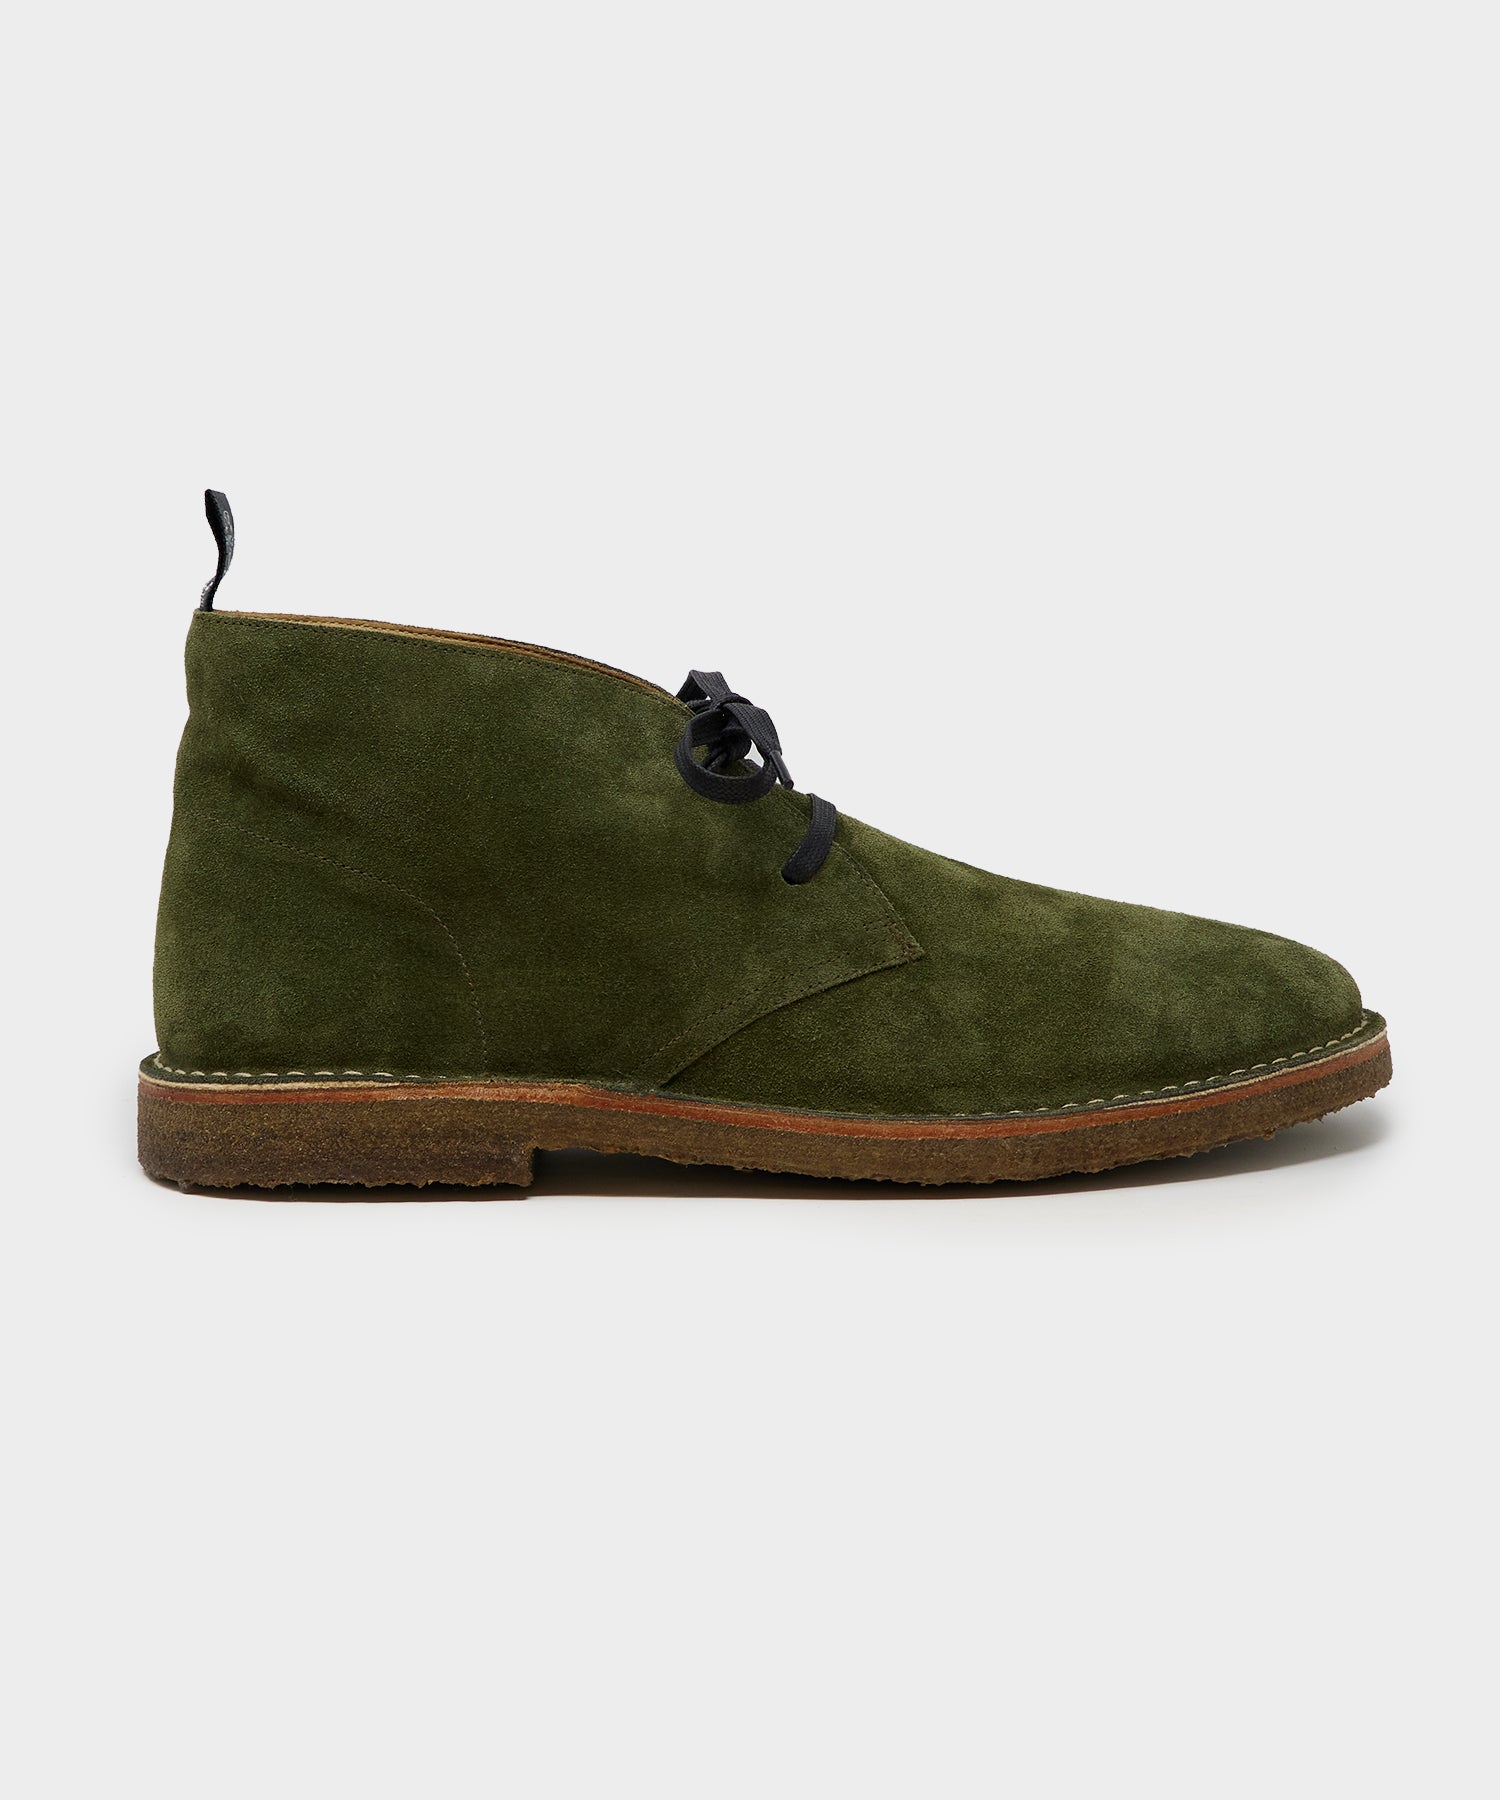 Nomad Boot in Olive